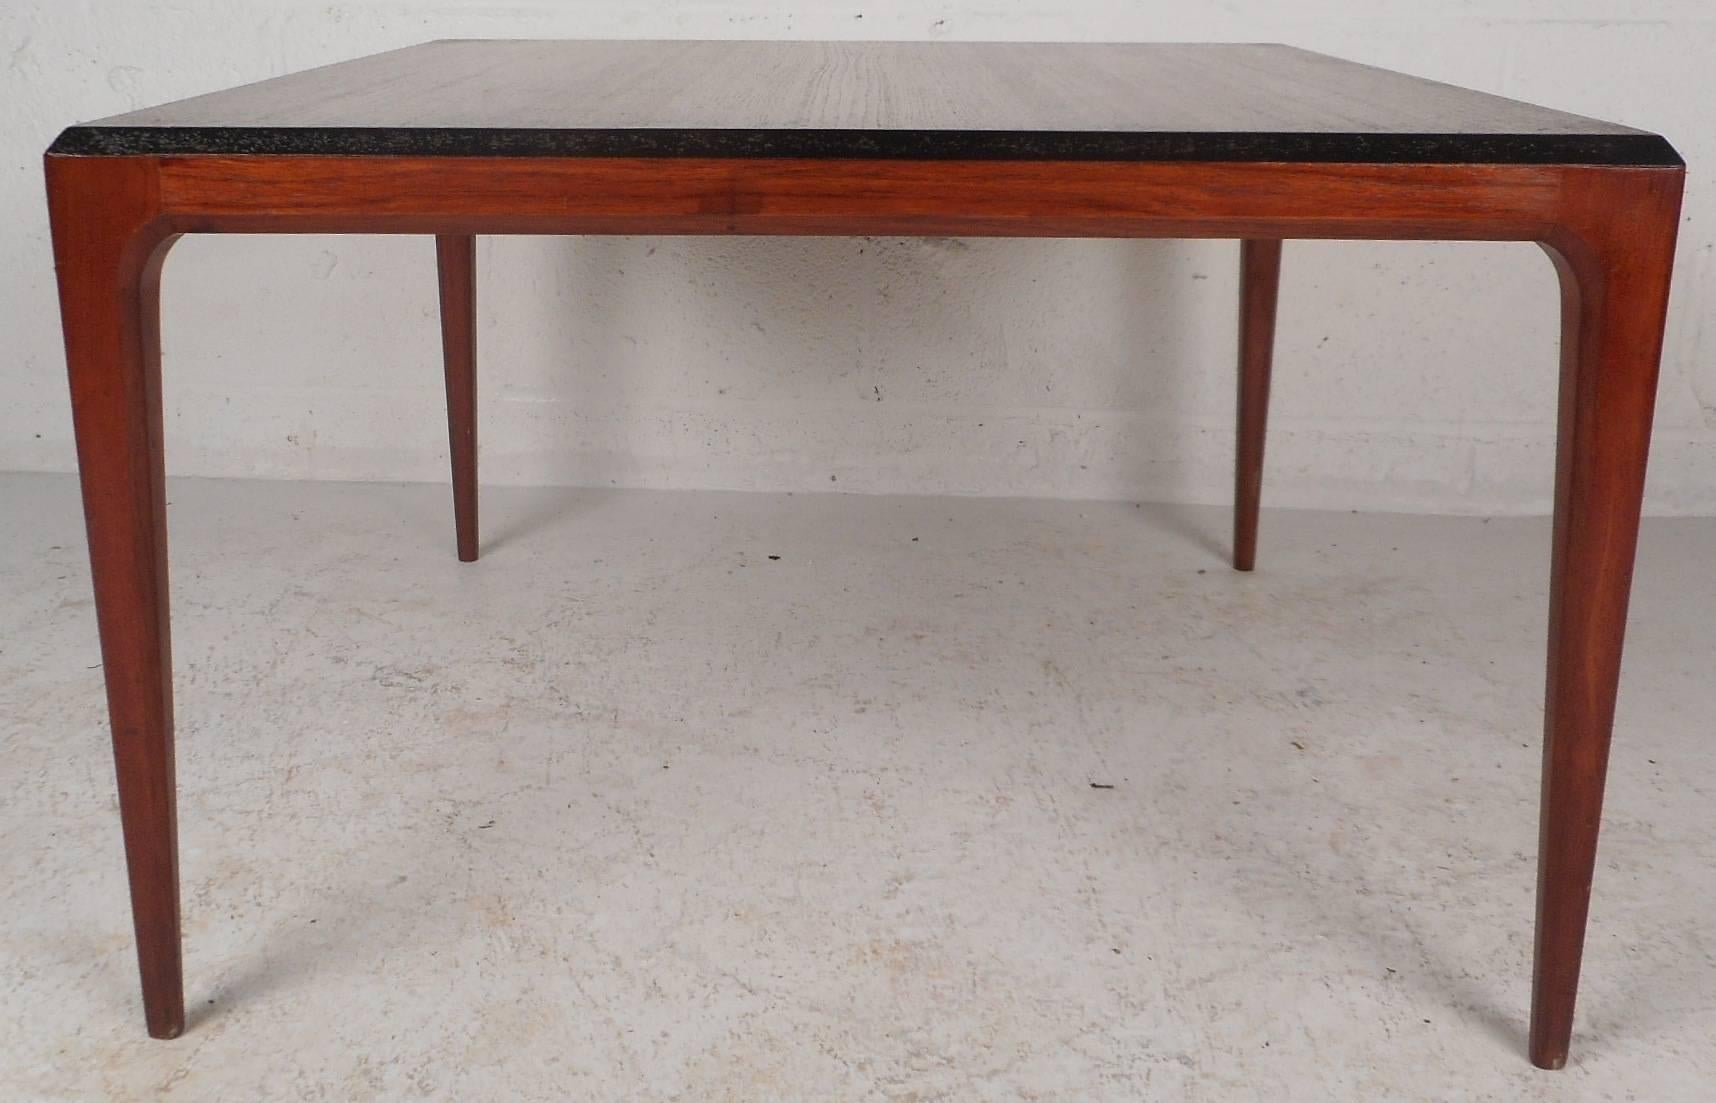 Beautiful vintage modern coffee table features stylish beveled edges with an ebonized strip that stretches all the way around the top. This sleek Mid-Century piece sits on top of four long and sturdy tapered legs. Versatile design with elegant